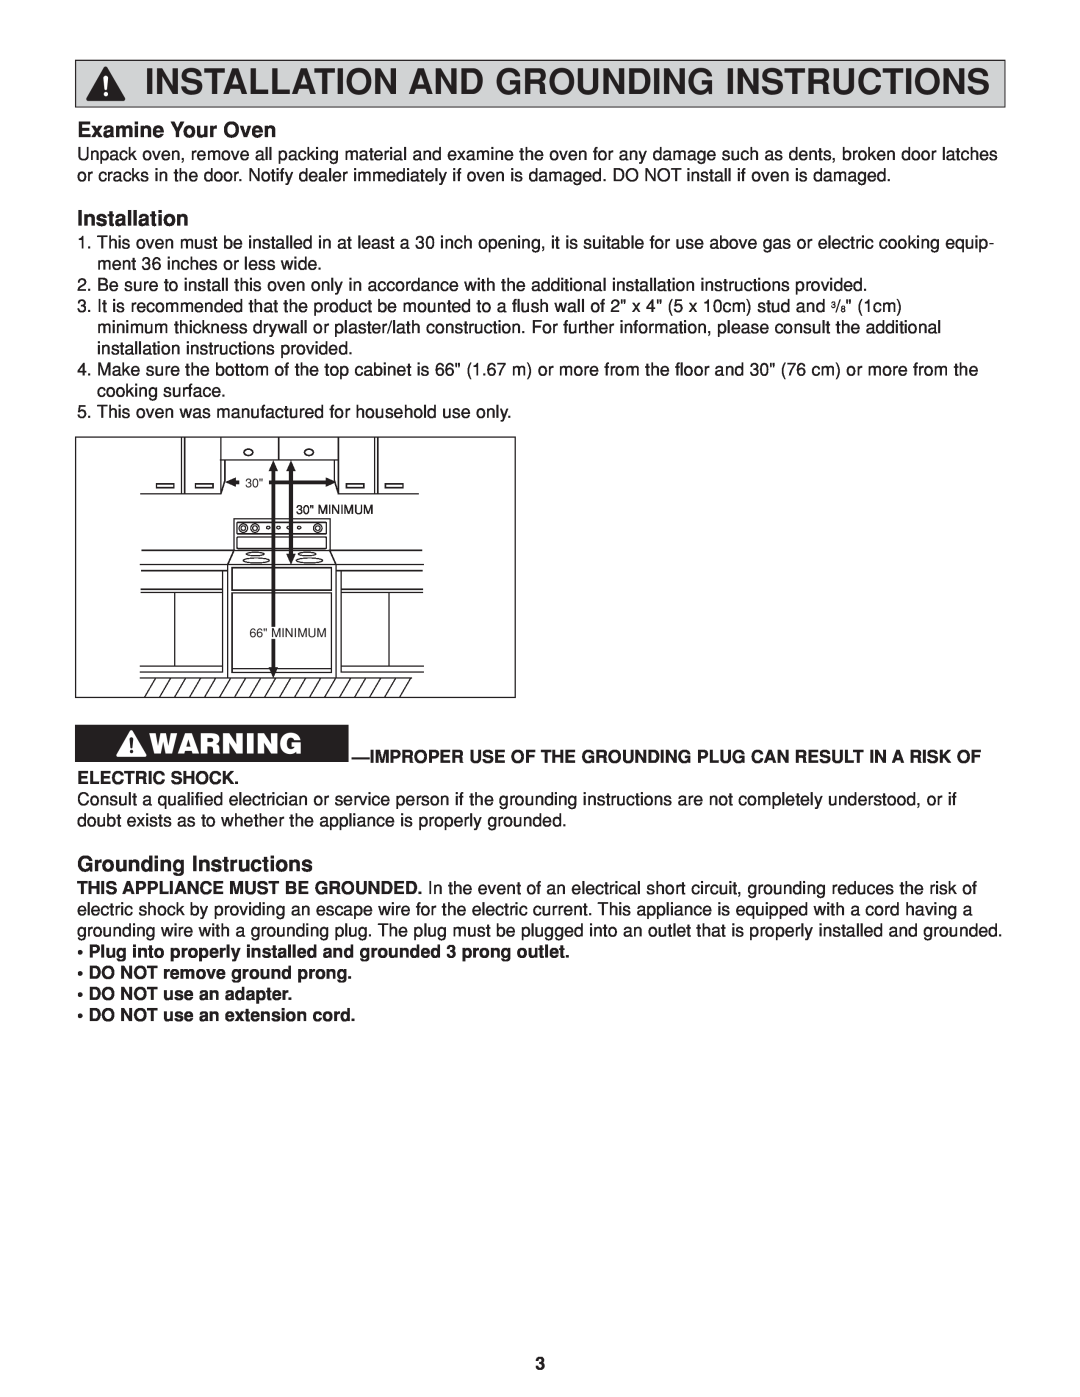 Panasonic NN-H264 important safety instructions Installation And Grounding Instructions, Examine Your Oven 